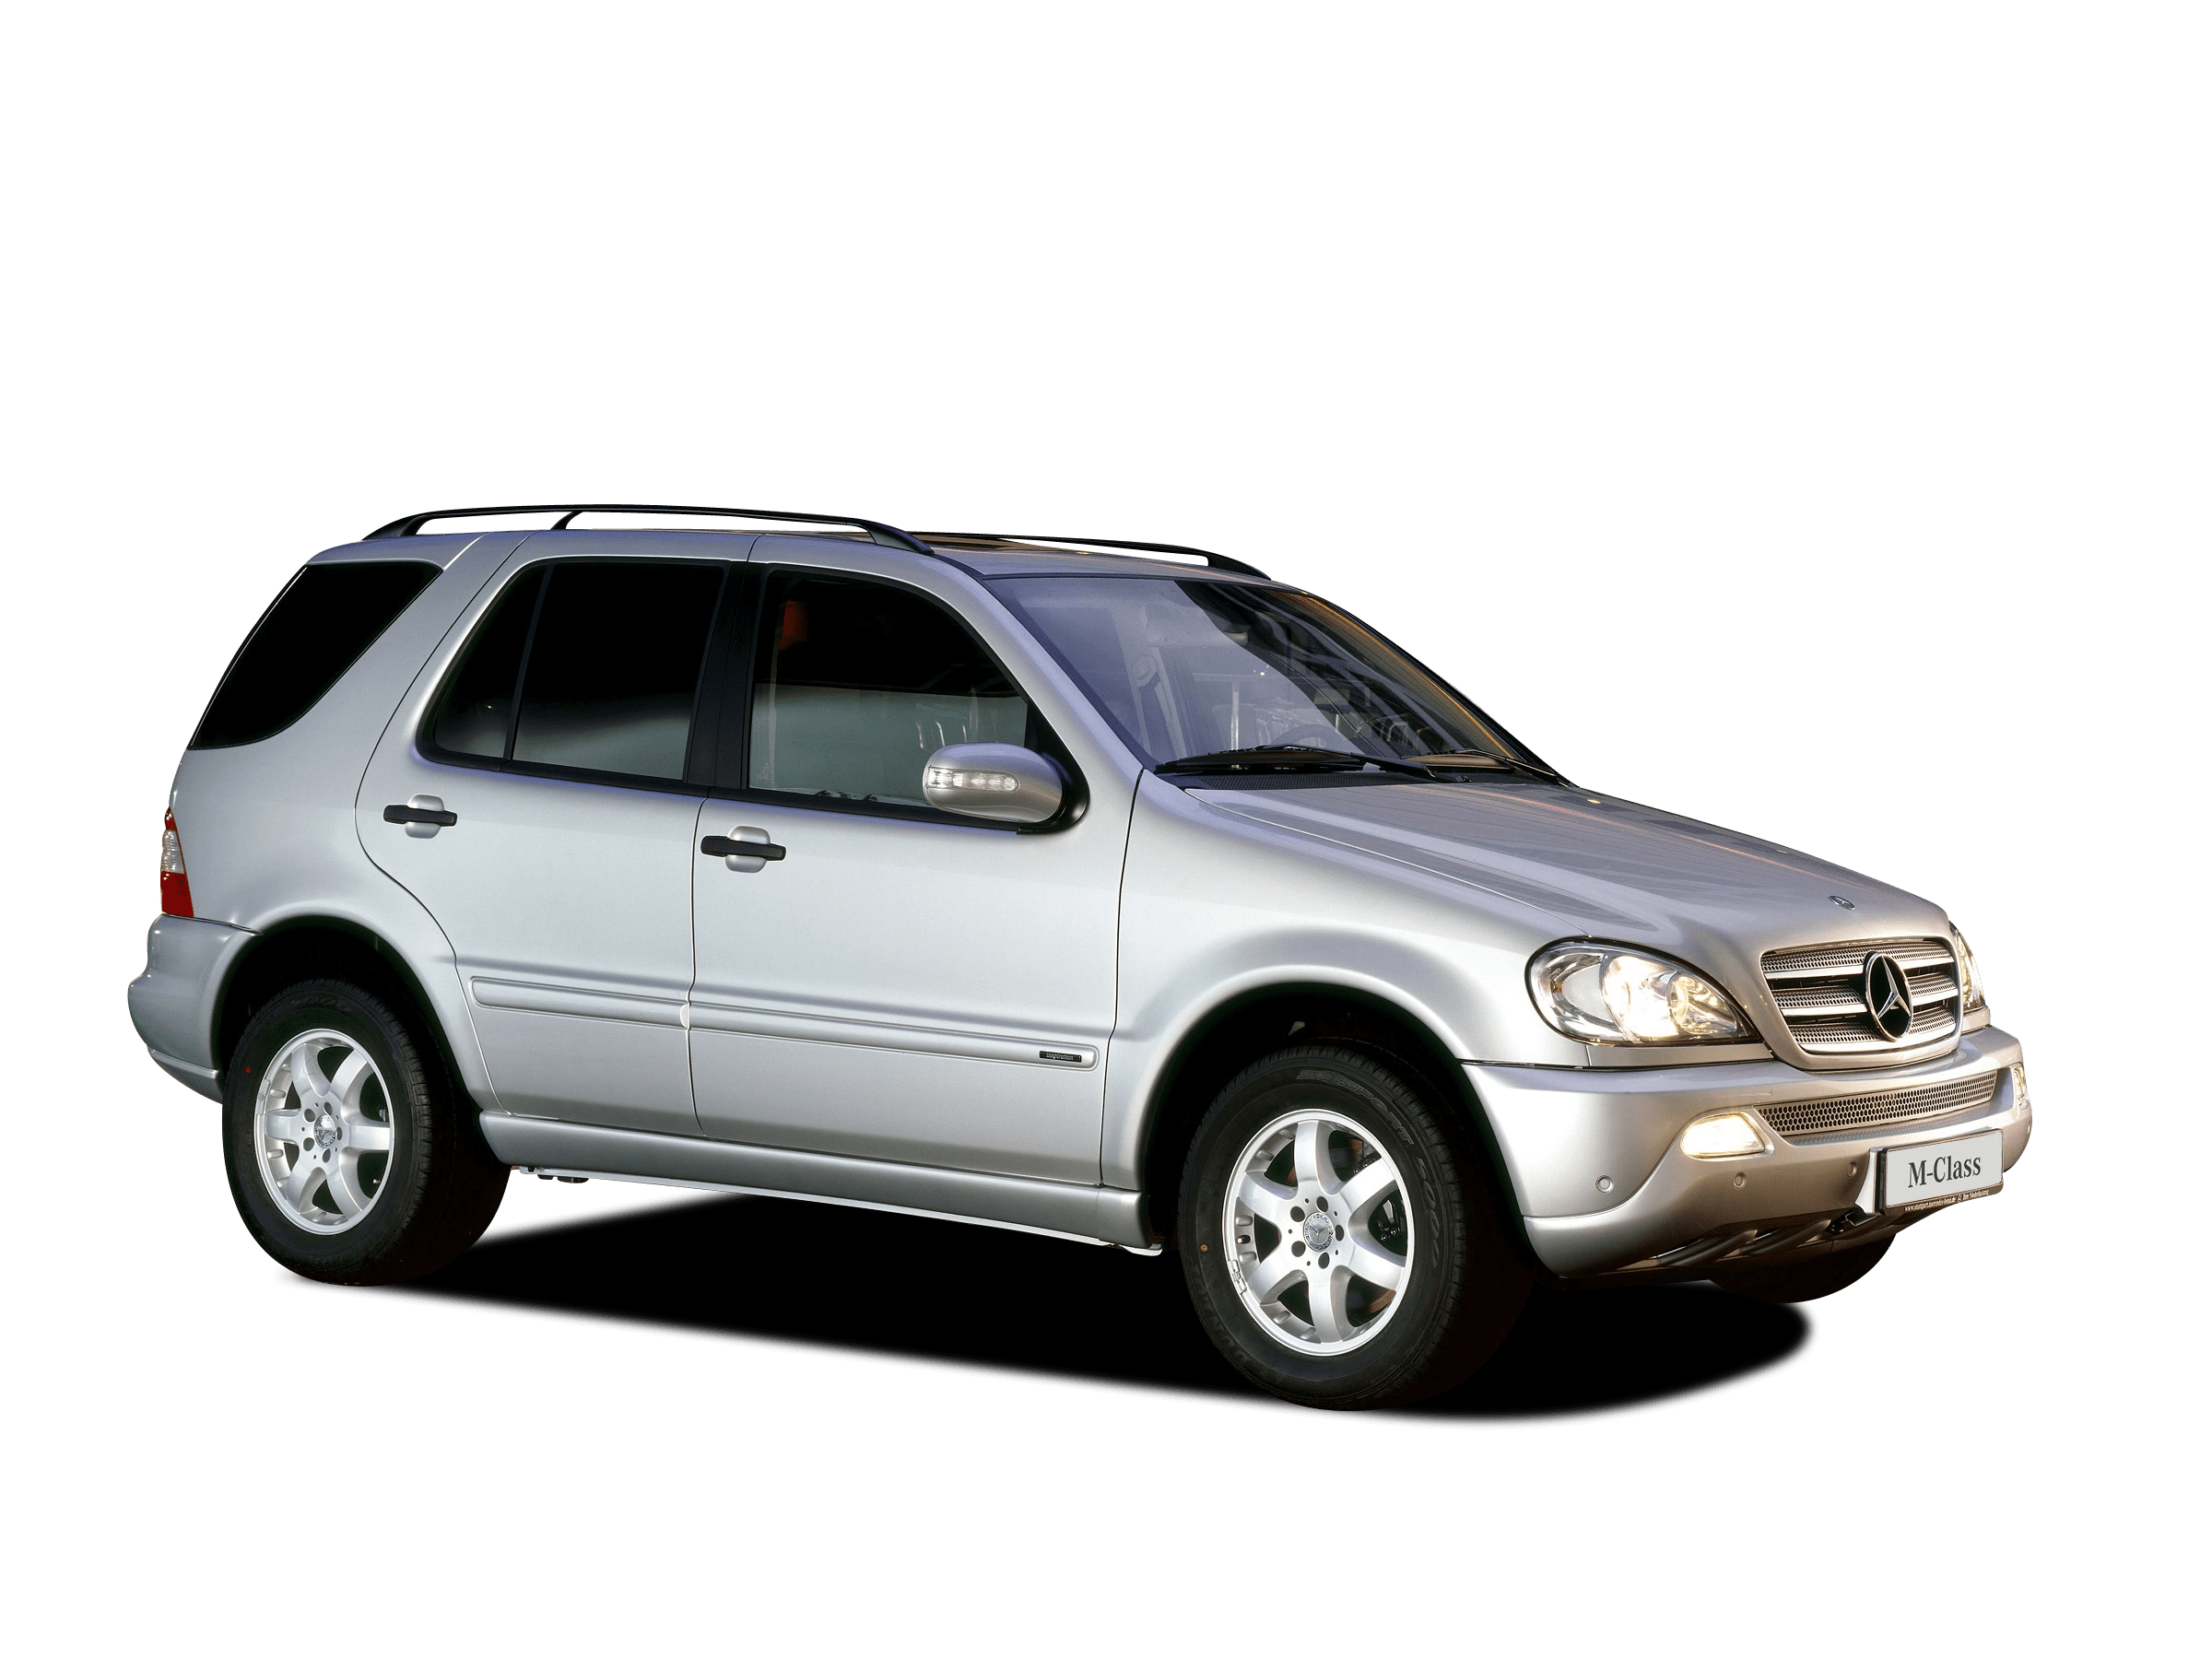 Mercedes Ml 500 Review For Sale Specs Carsguide